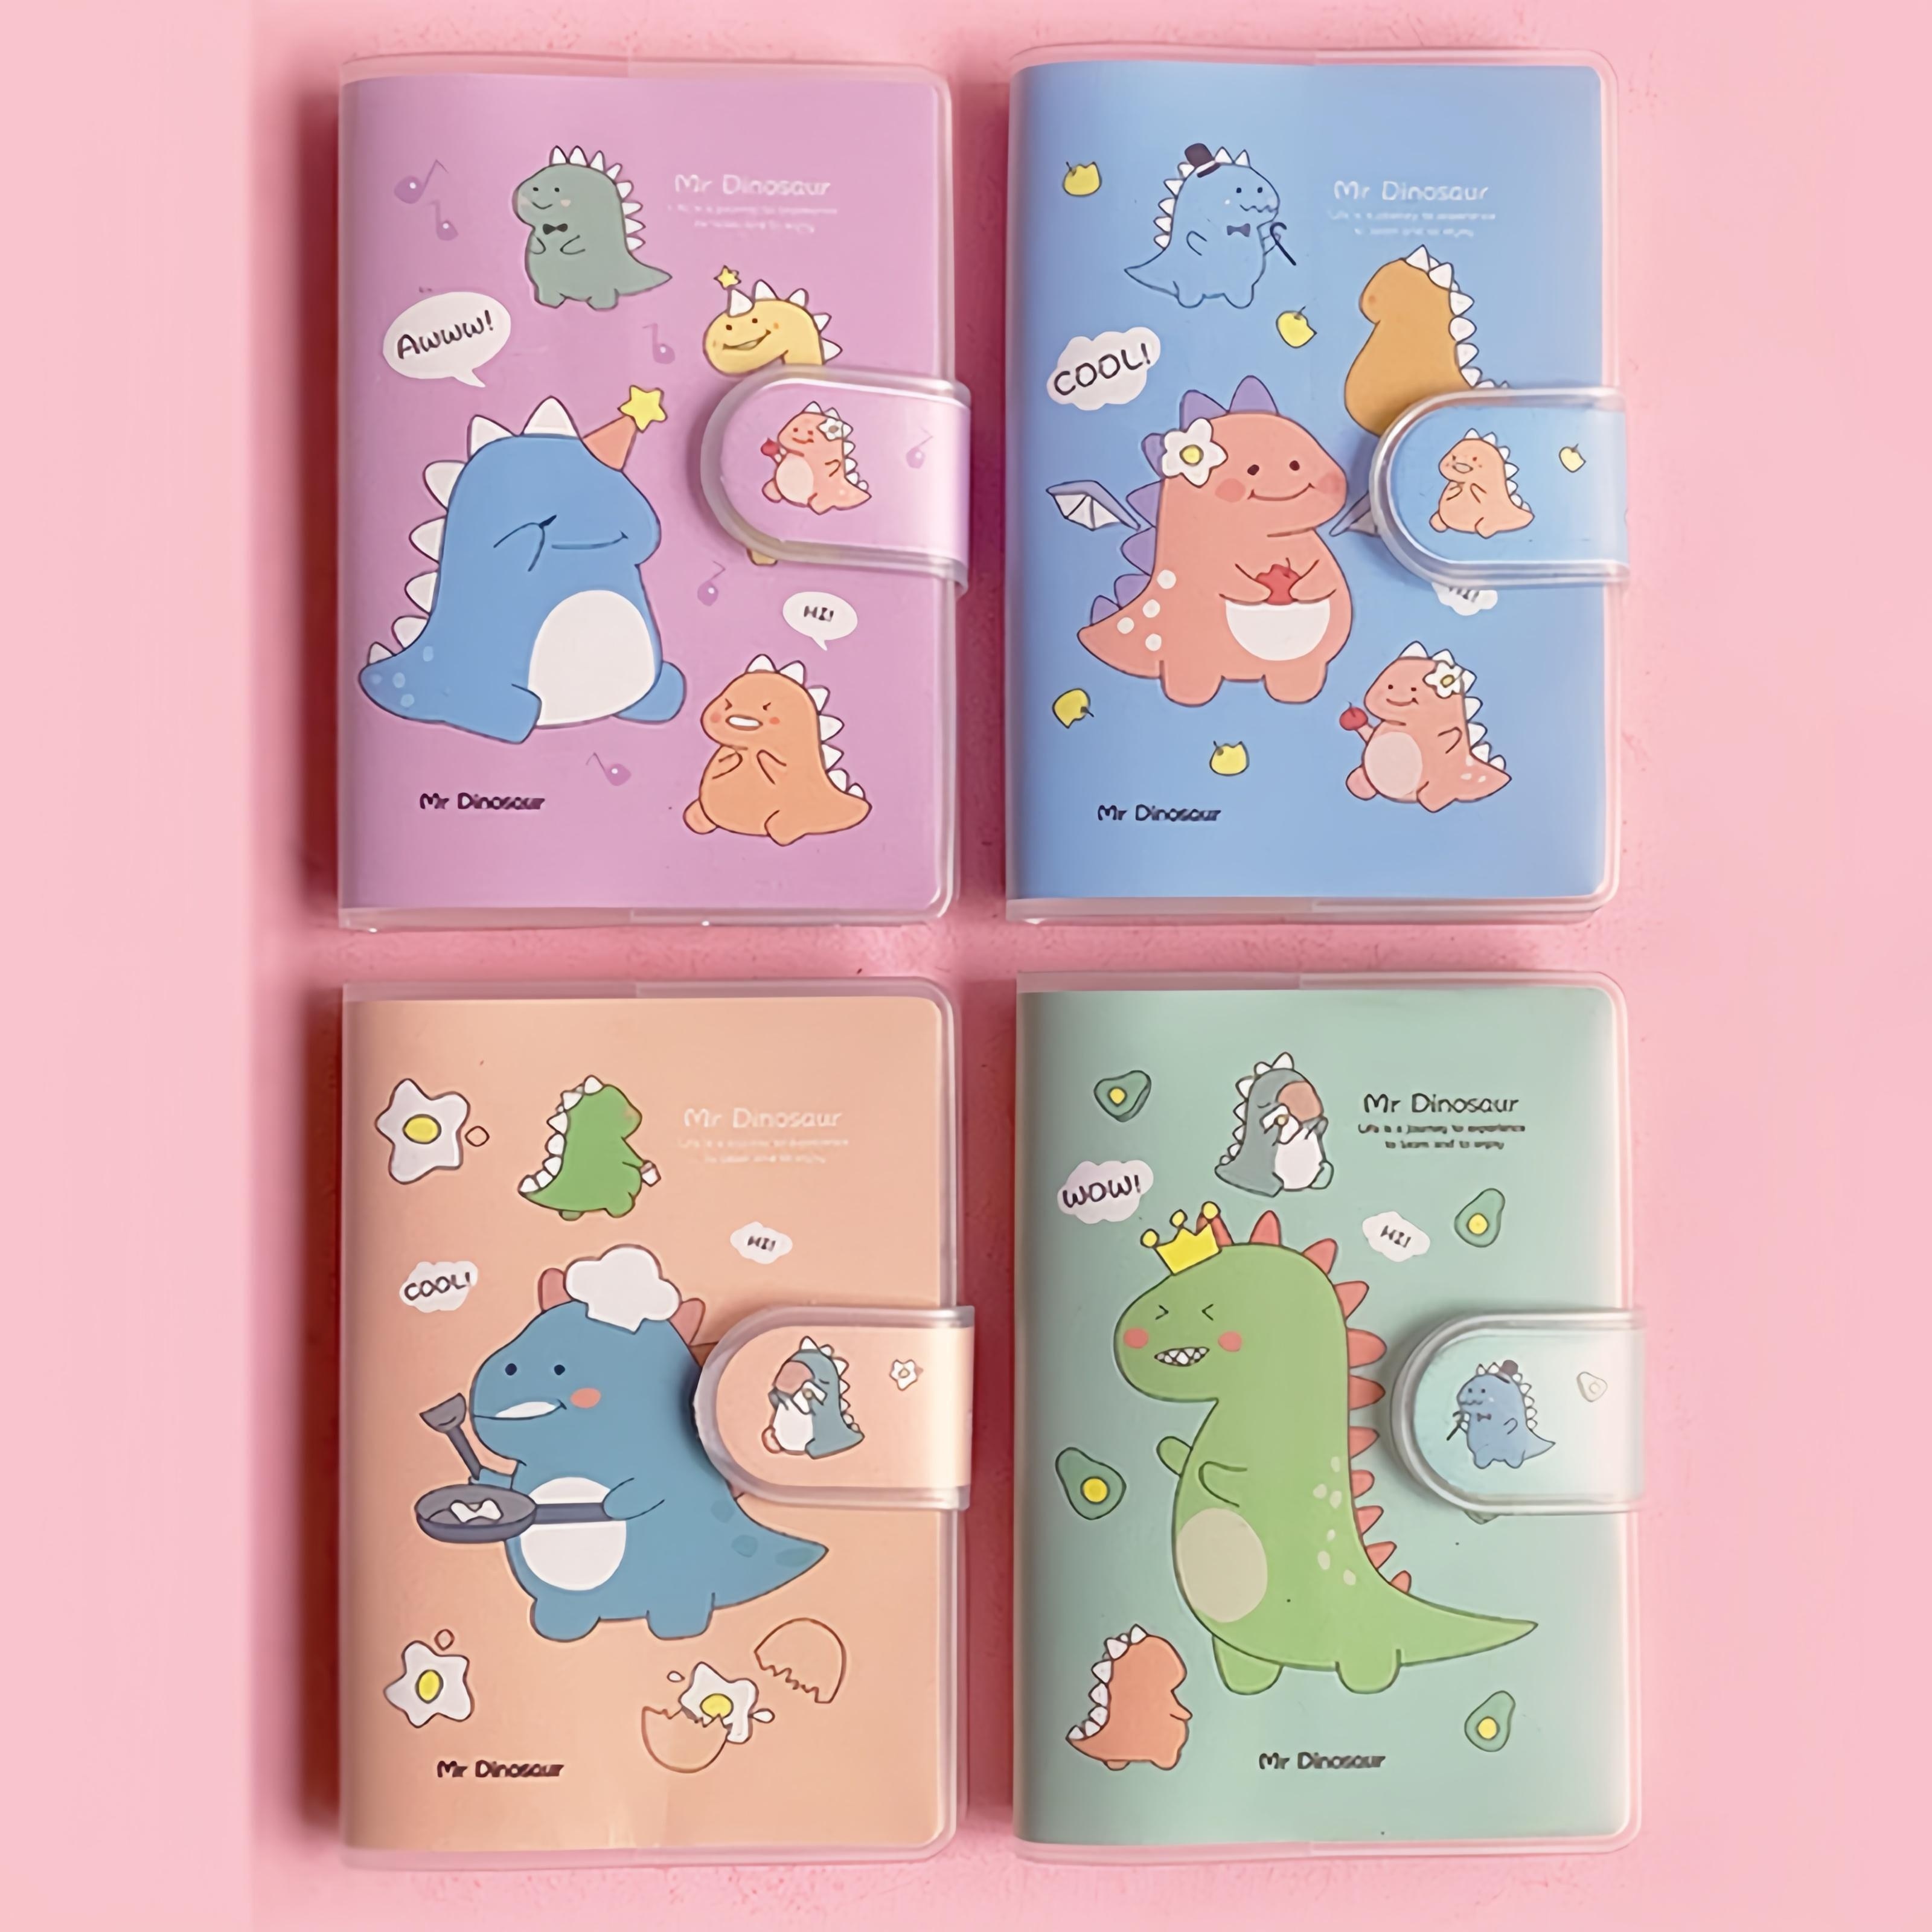 

1pc/1set Cute Elegant Dinosaur Themed Steno Notebook With Protective Jelly Cover - Pocket Size Diary With 70 Lined Pages For Notes, Planning, Office, Study, And Travel Essentials